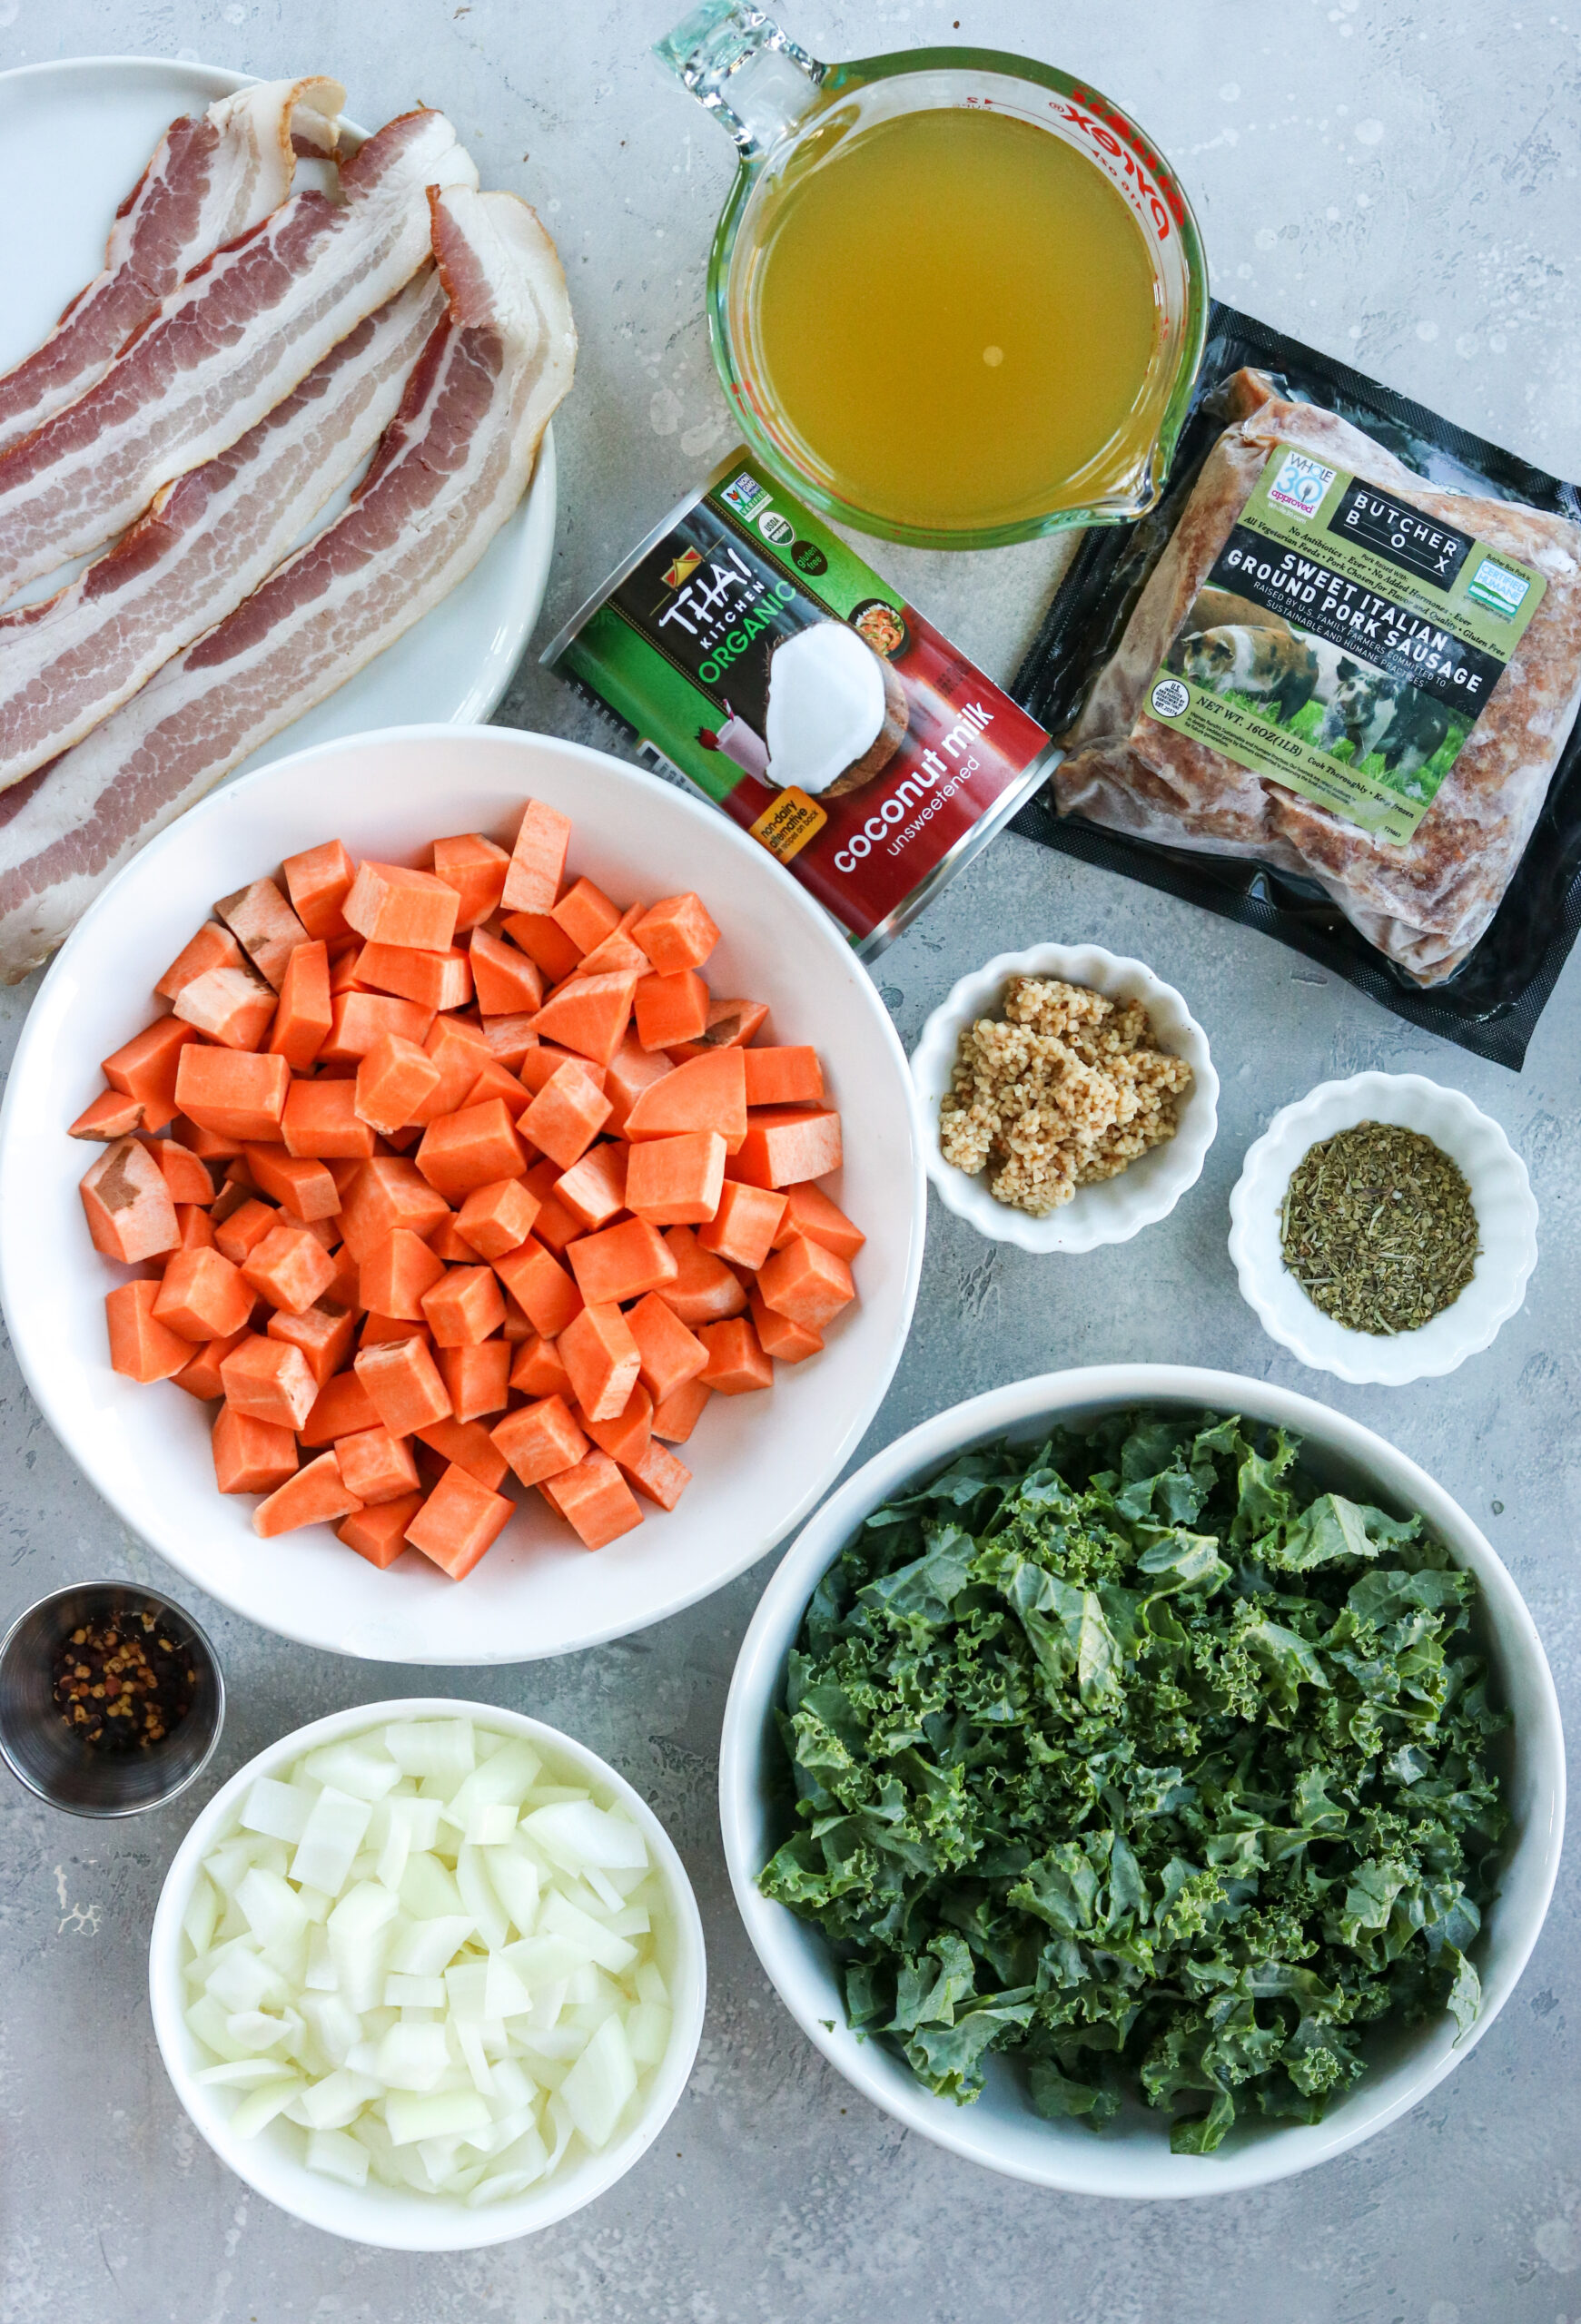 Ingredients for Whole30 Zuppa Toscana in bowls